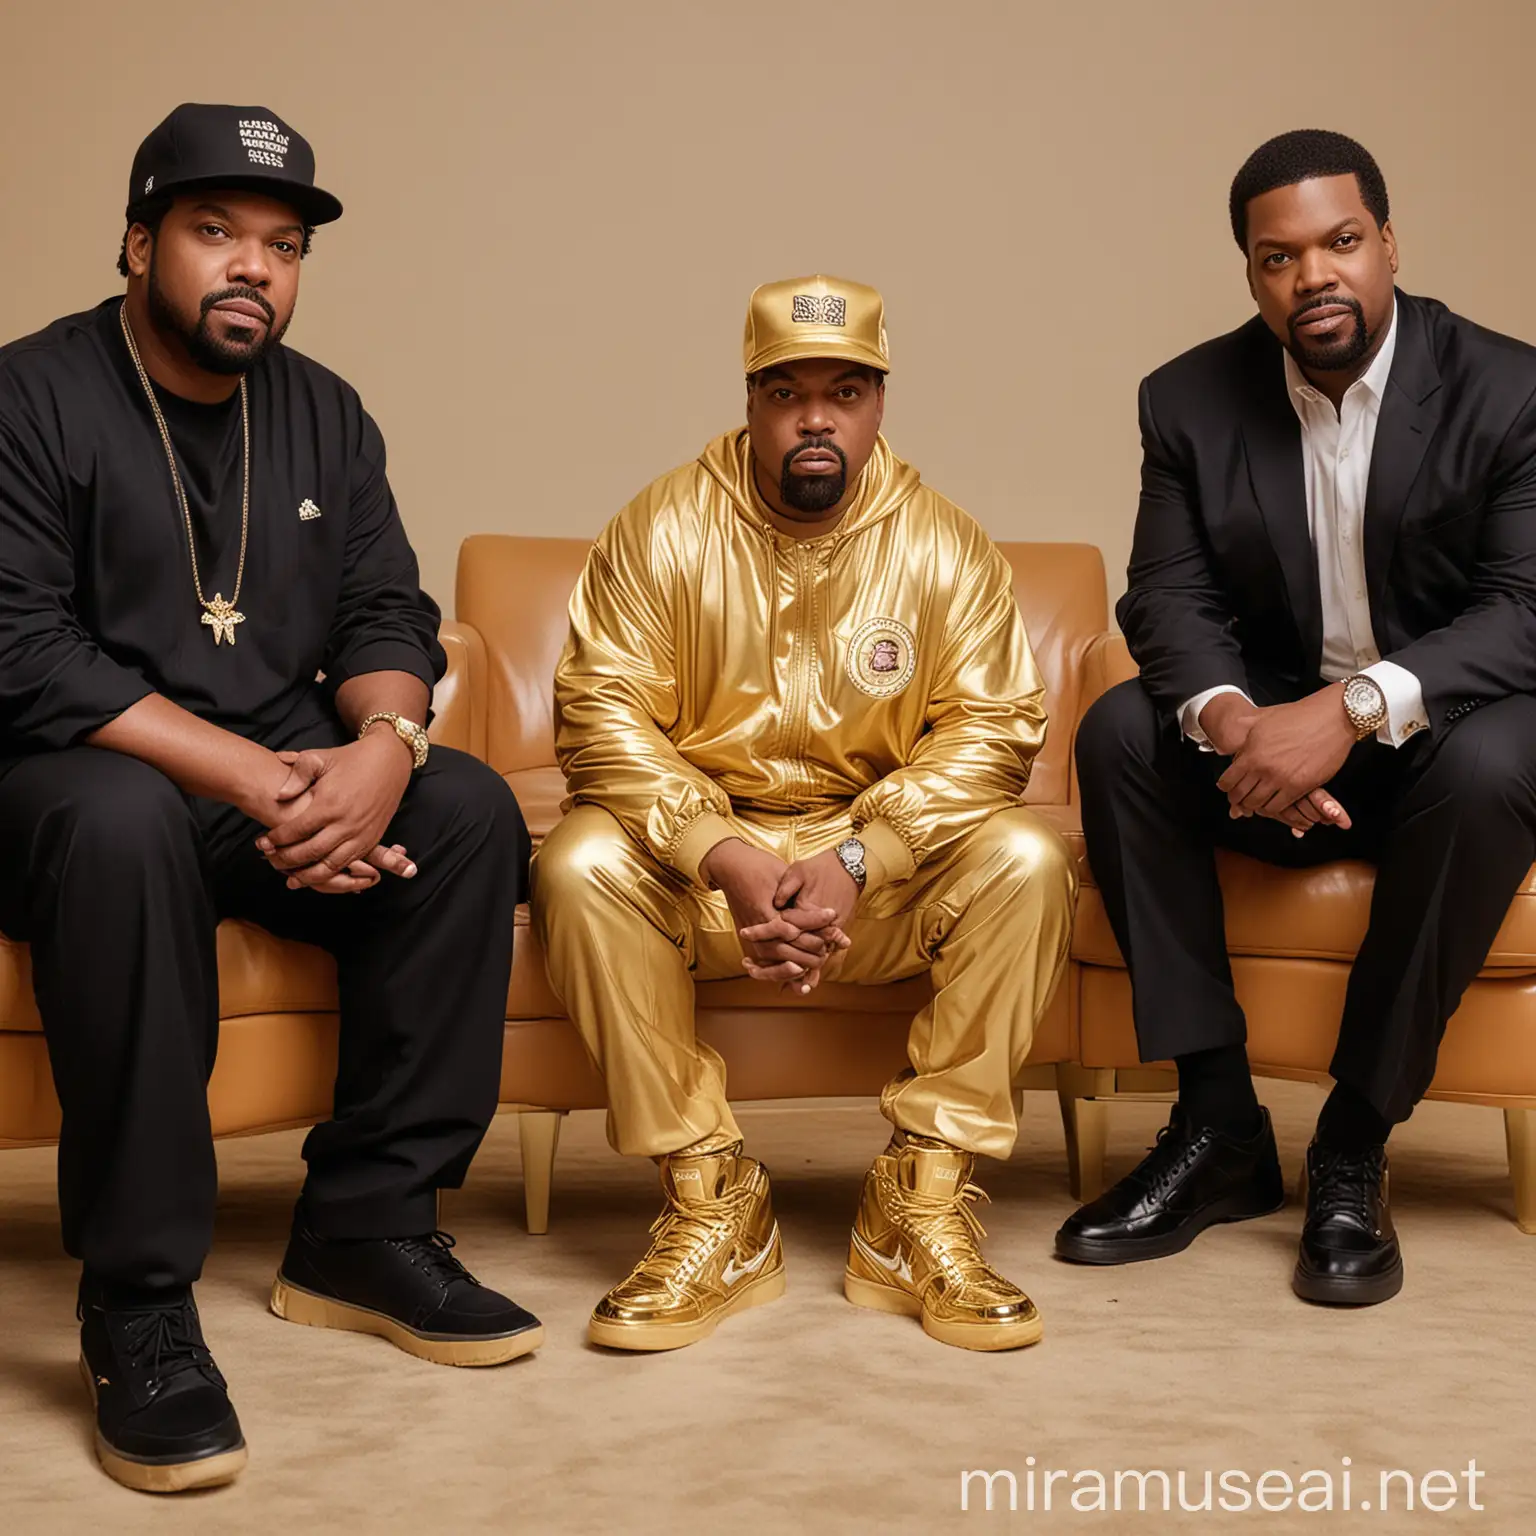 Donald Trump Sitting with Ice Cube and Chris Tucker Wearing Golden T Sneakers